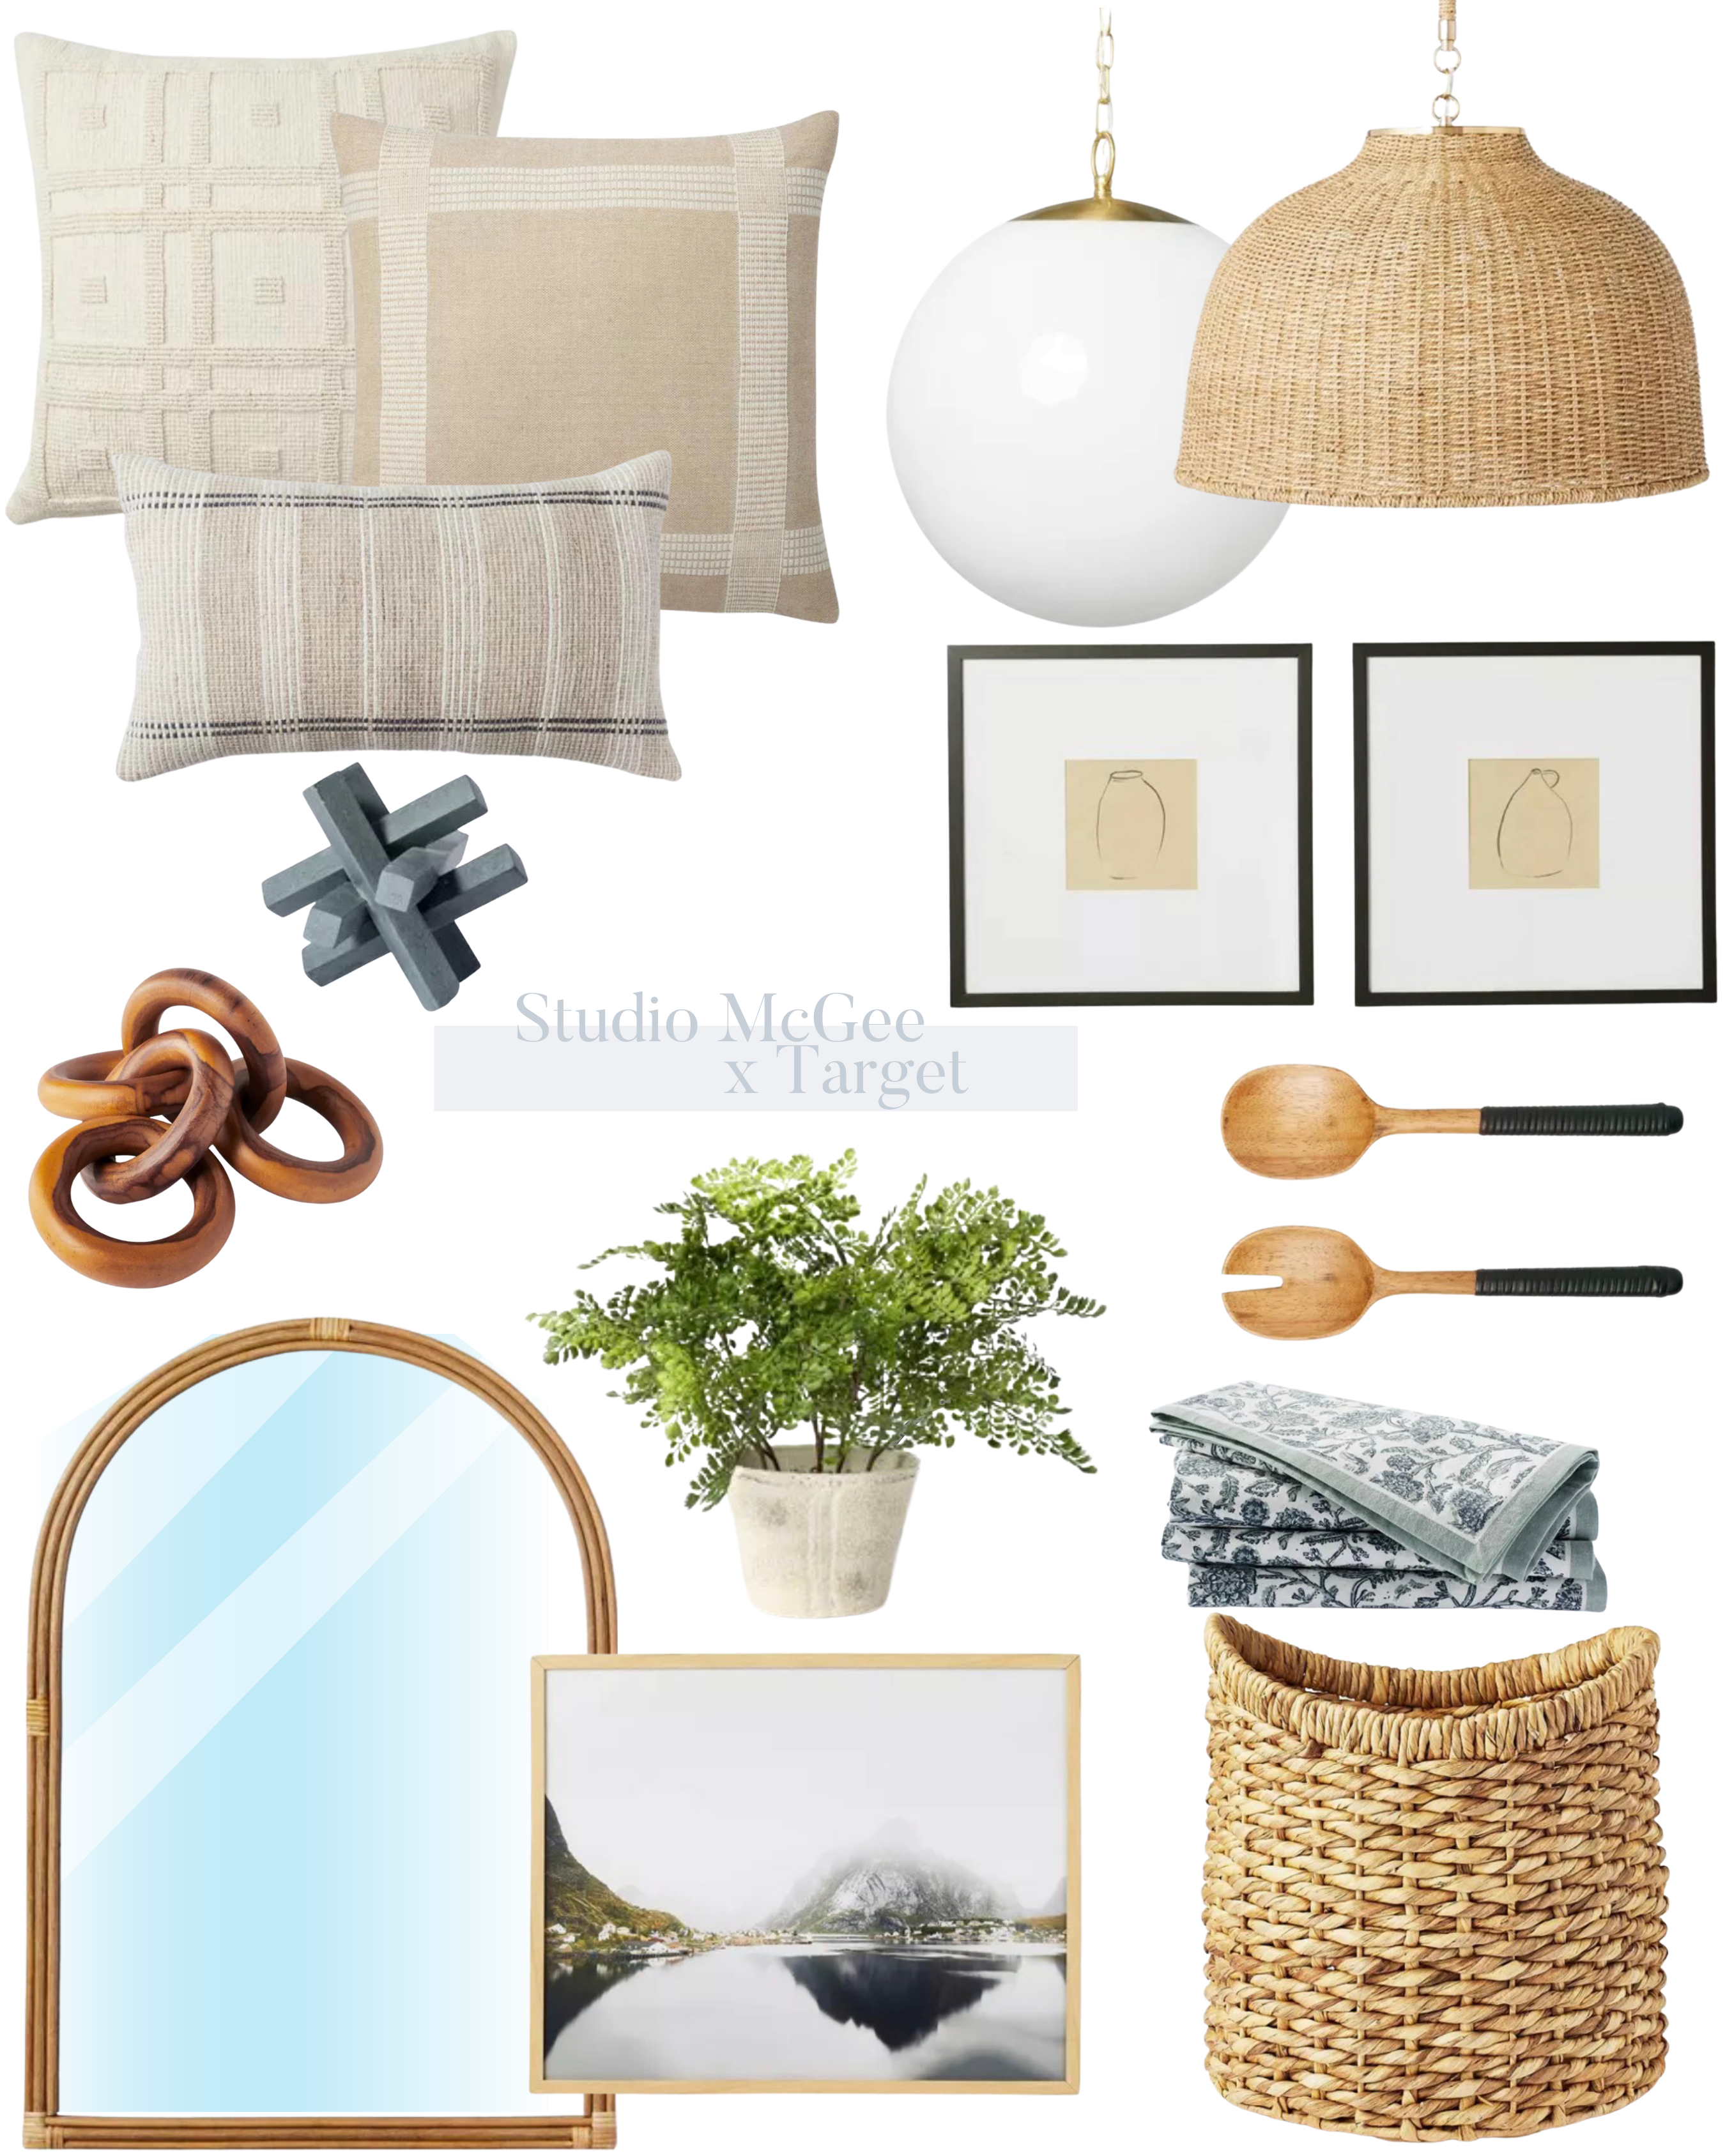 Here are my current Favorites from Studio McGee x Target including soft neutral pillows, chunky baskets, wall art and accessories.